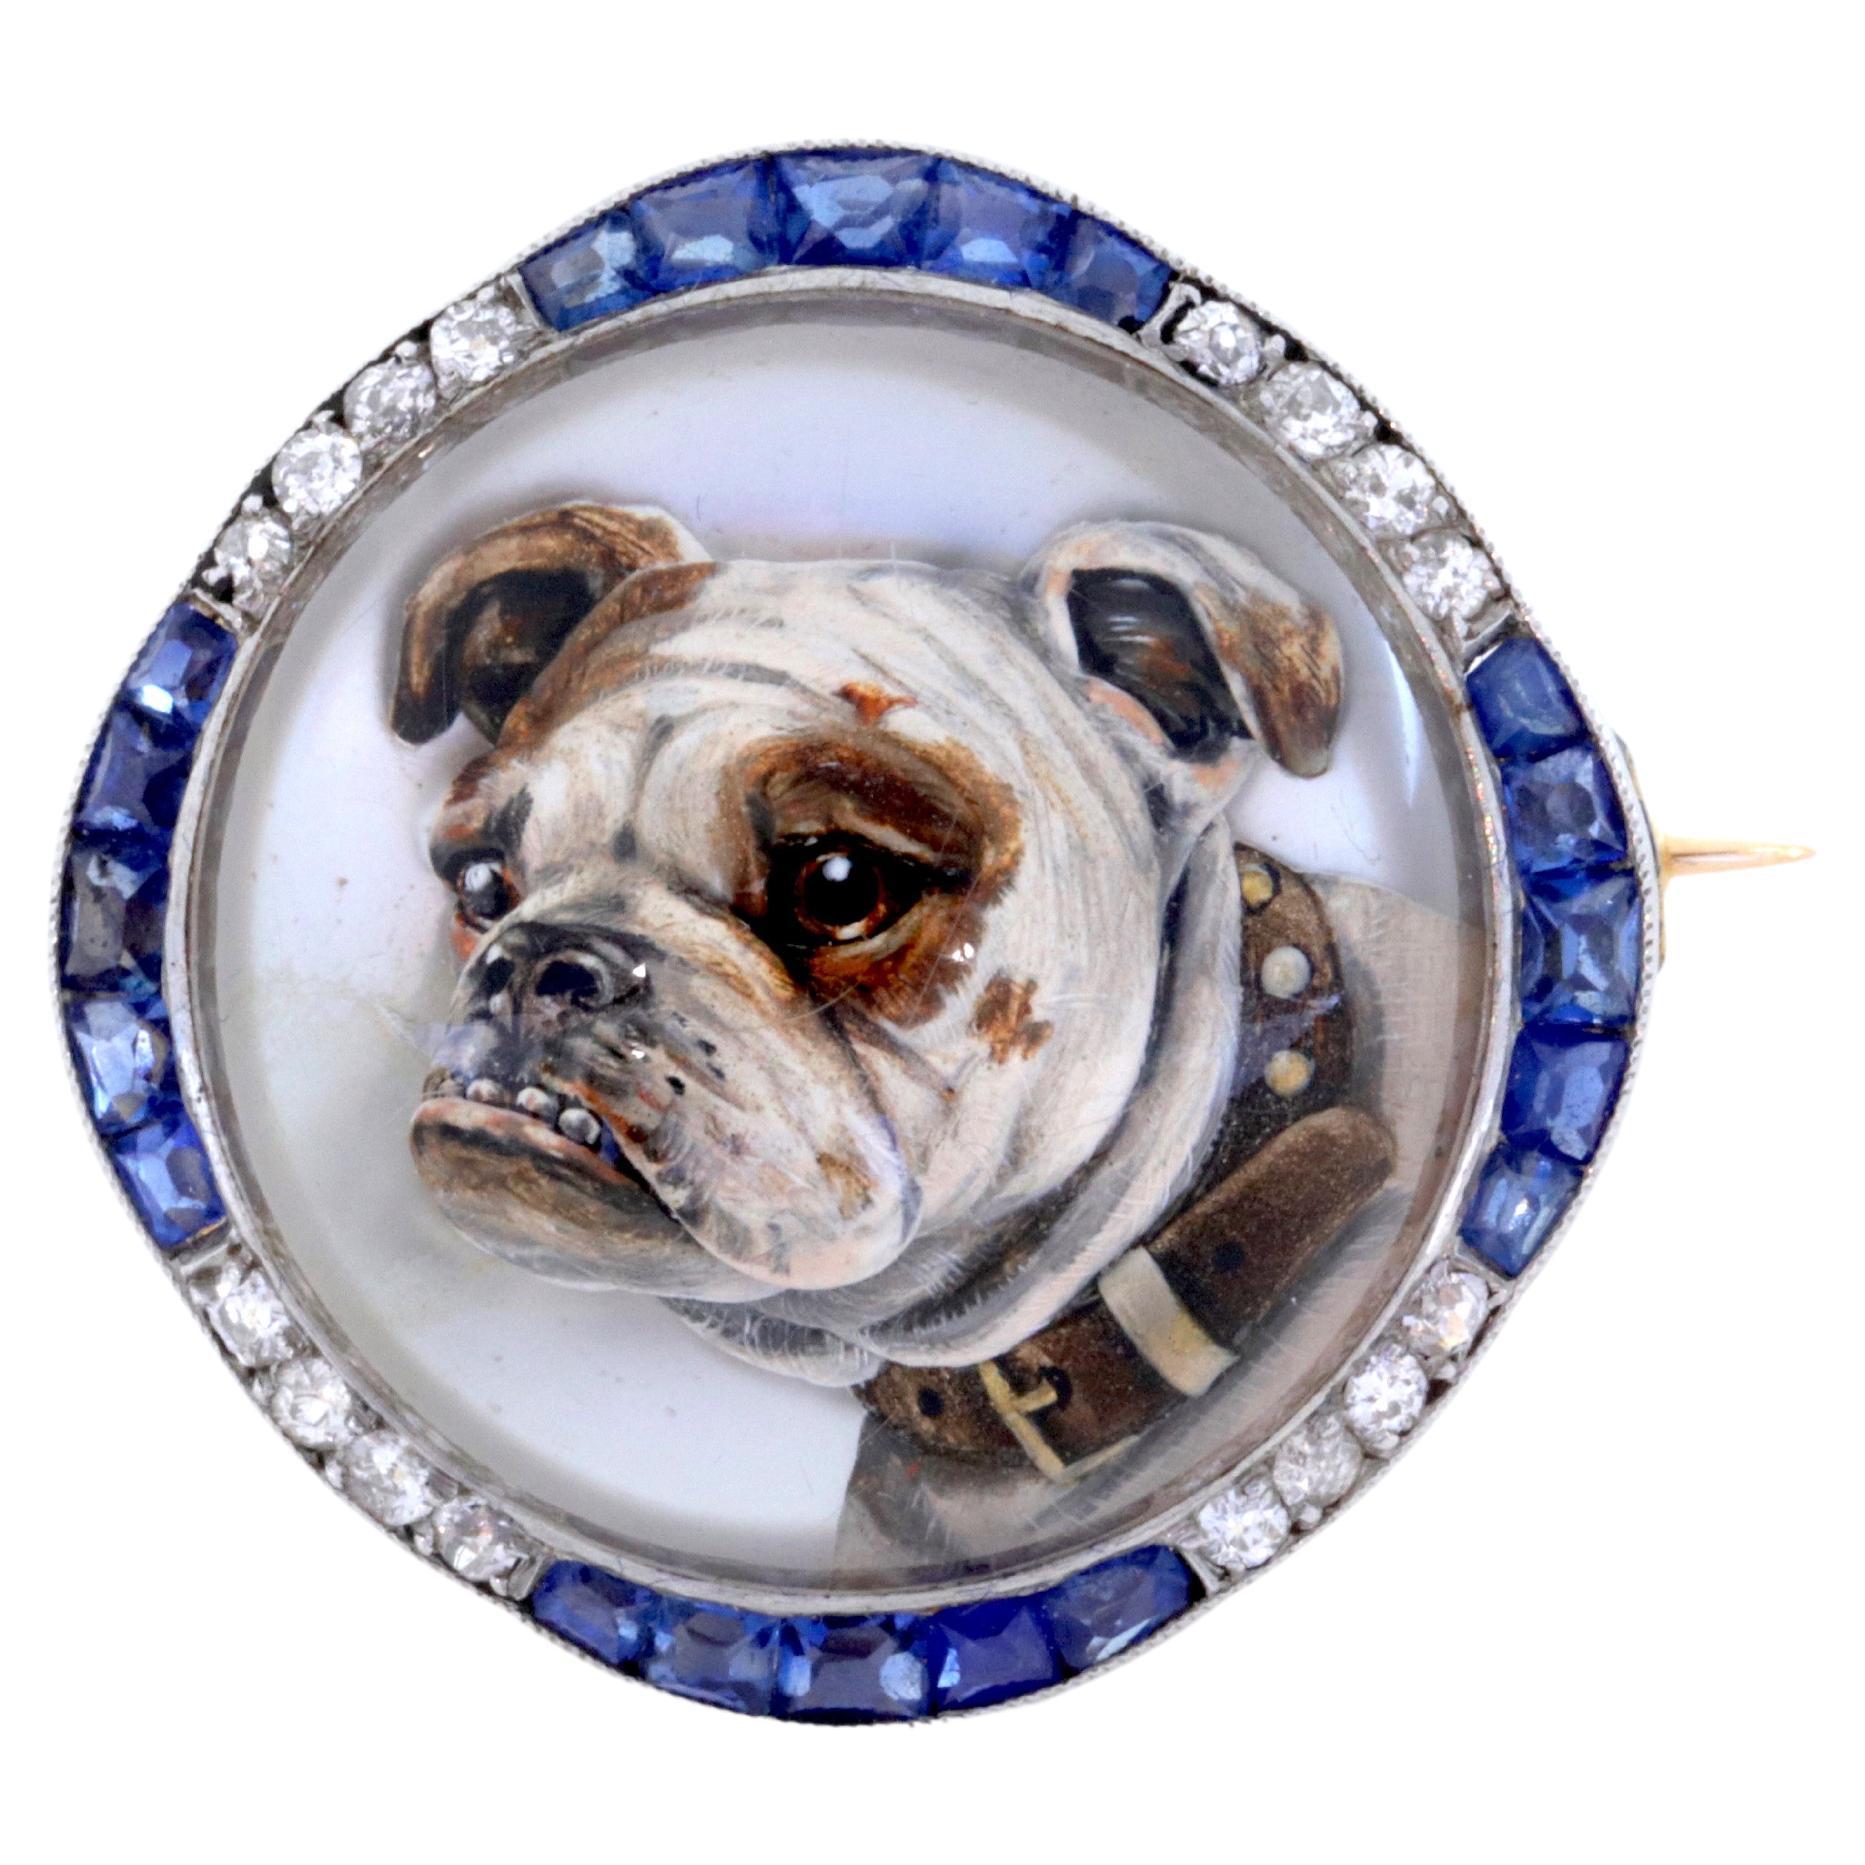 Exceptional Essex Crystal English Bulldog Brooch Set With Diamonds & Sapphires